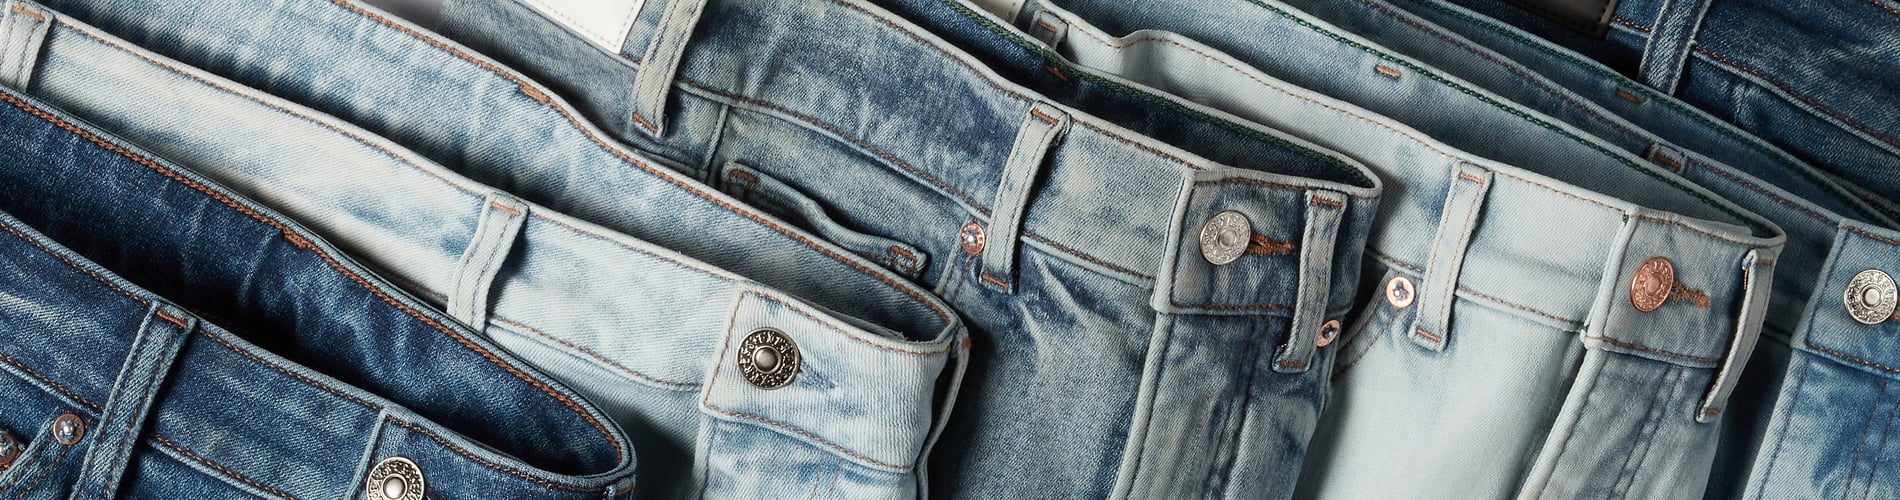 Express jeans.